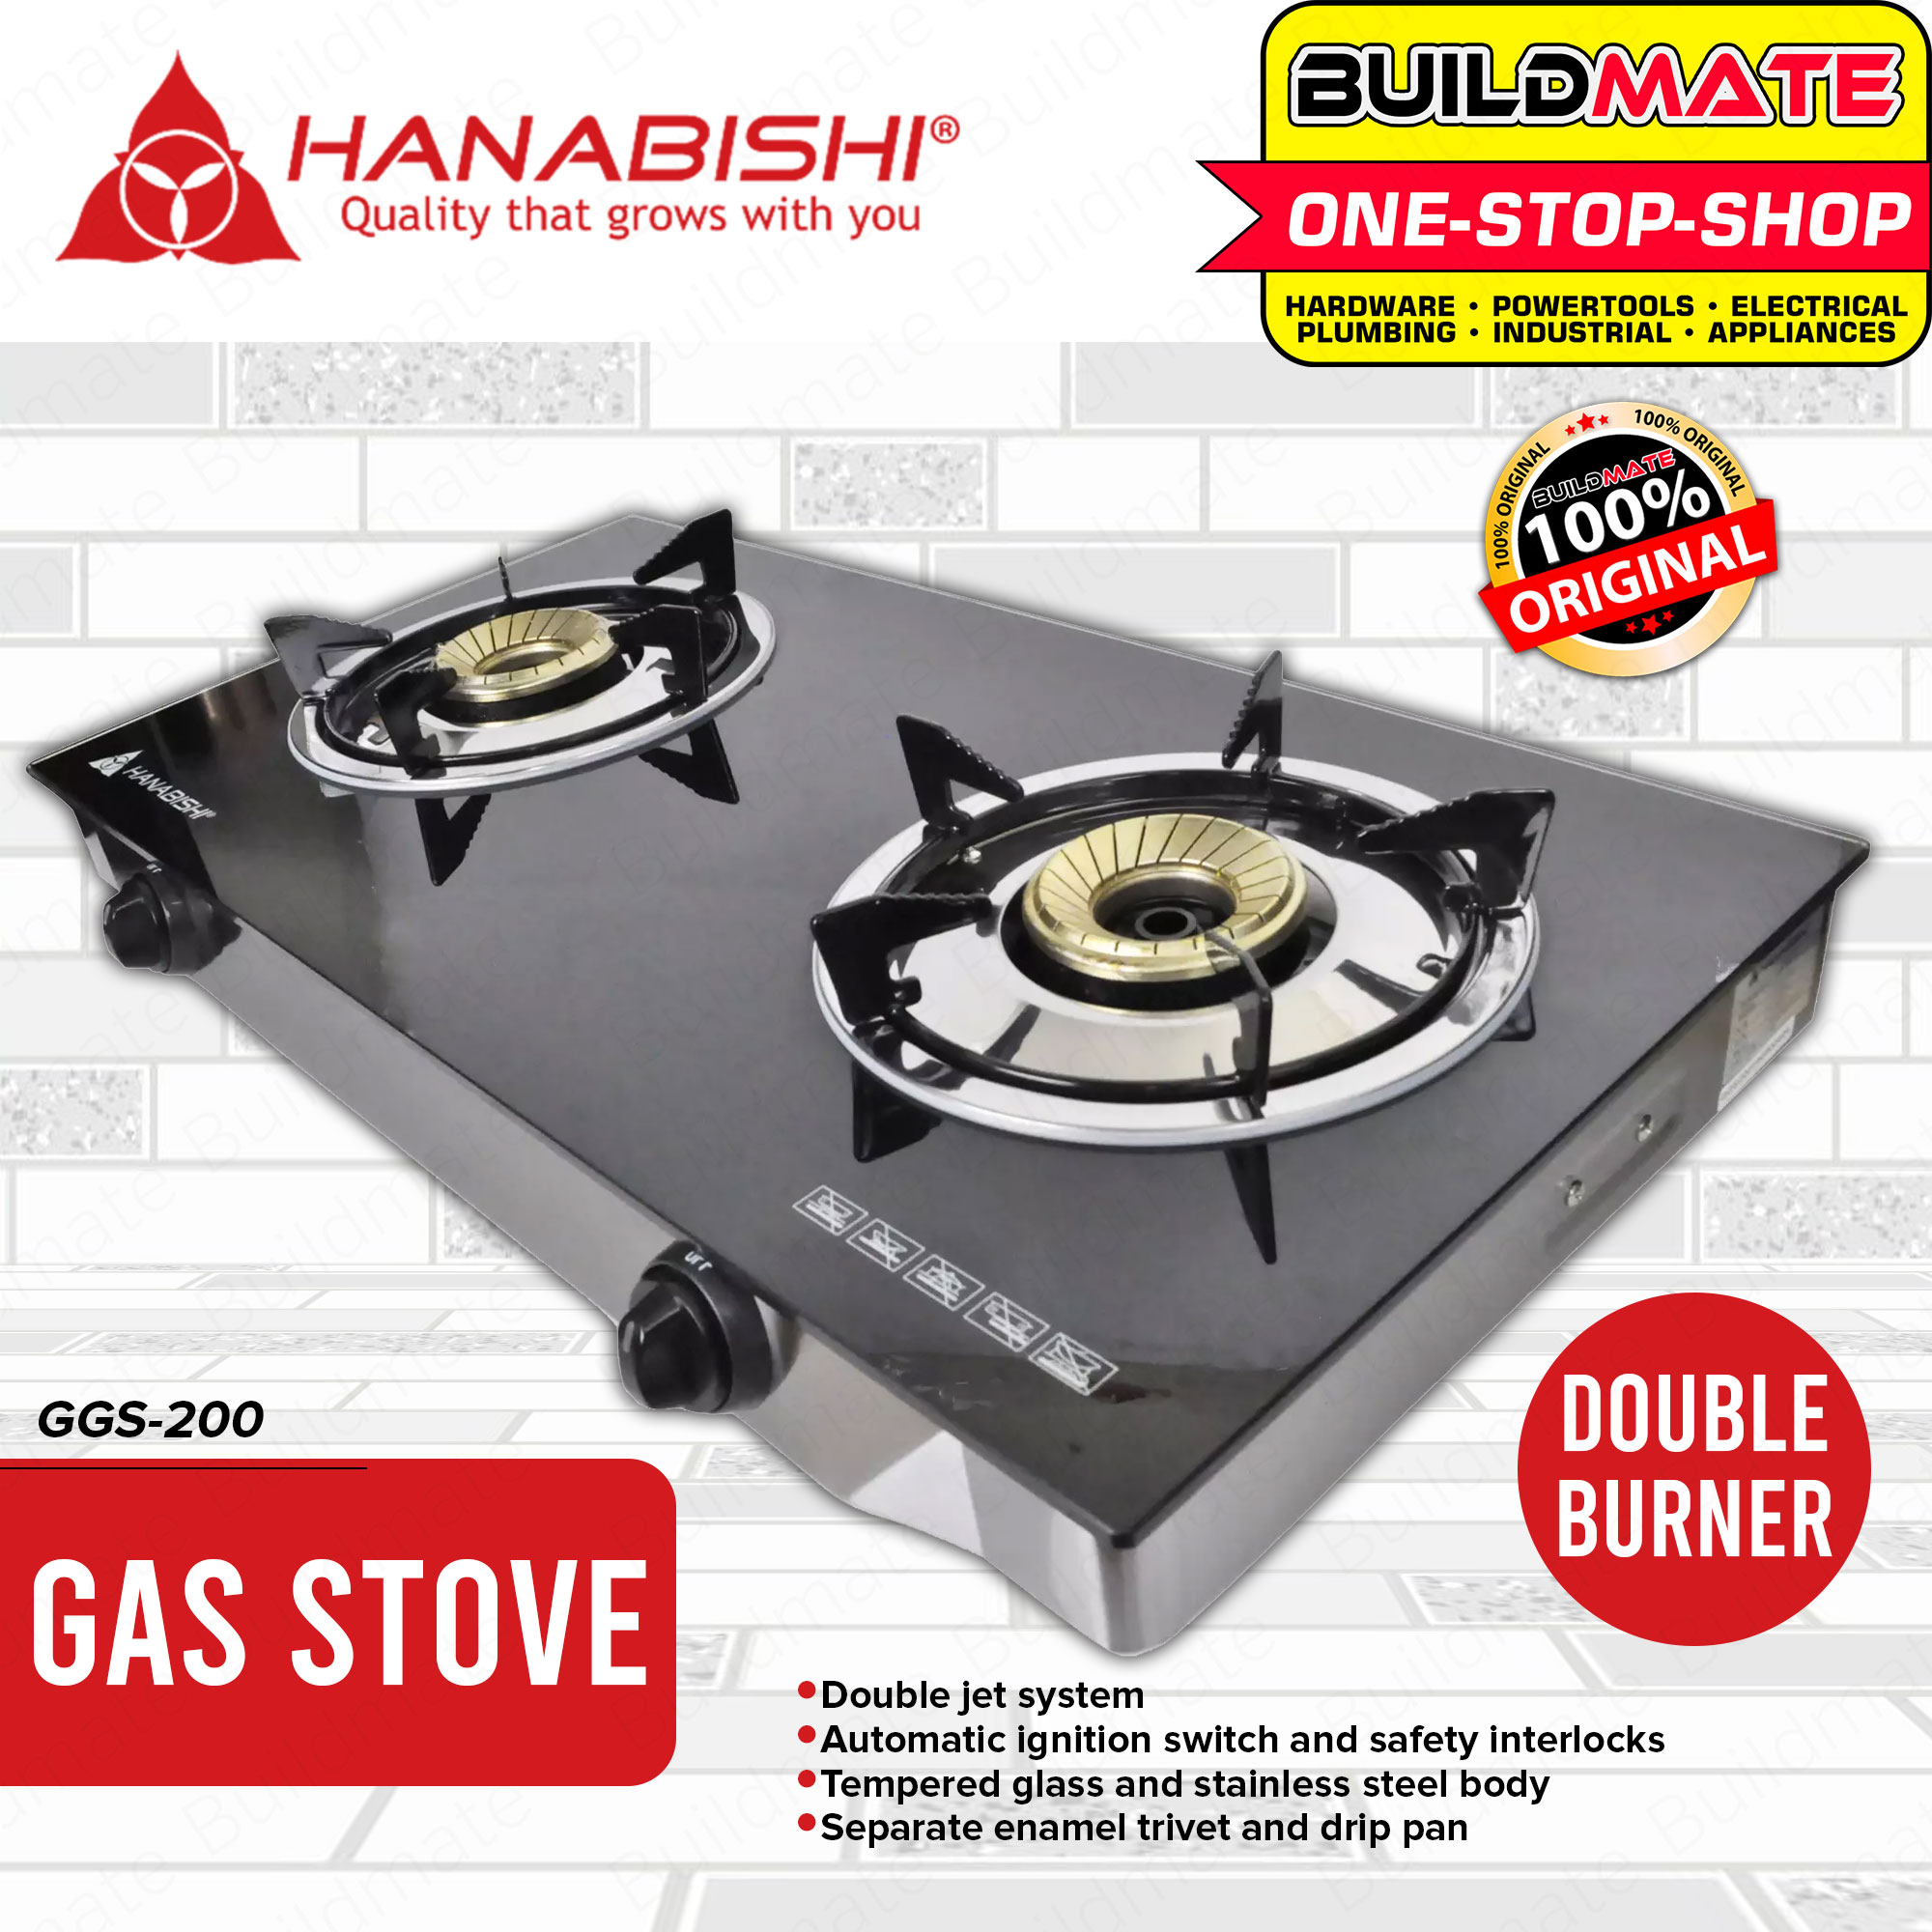 Hanabishi Gas Stove Double Burner Tempered Glass And Stainless Steel